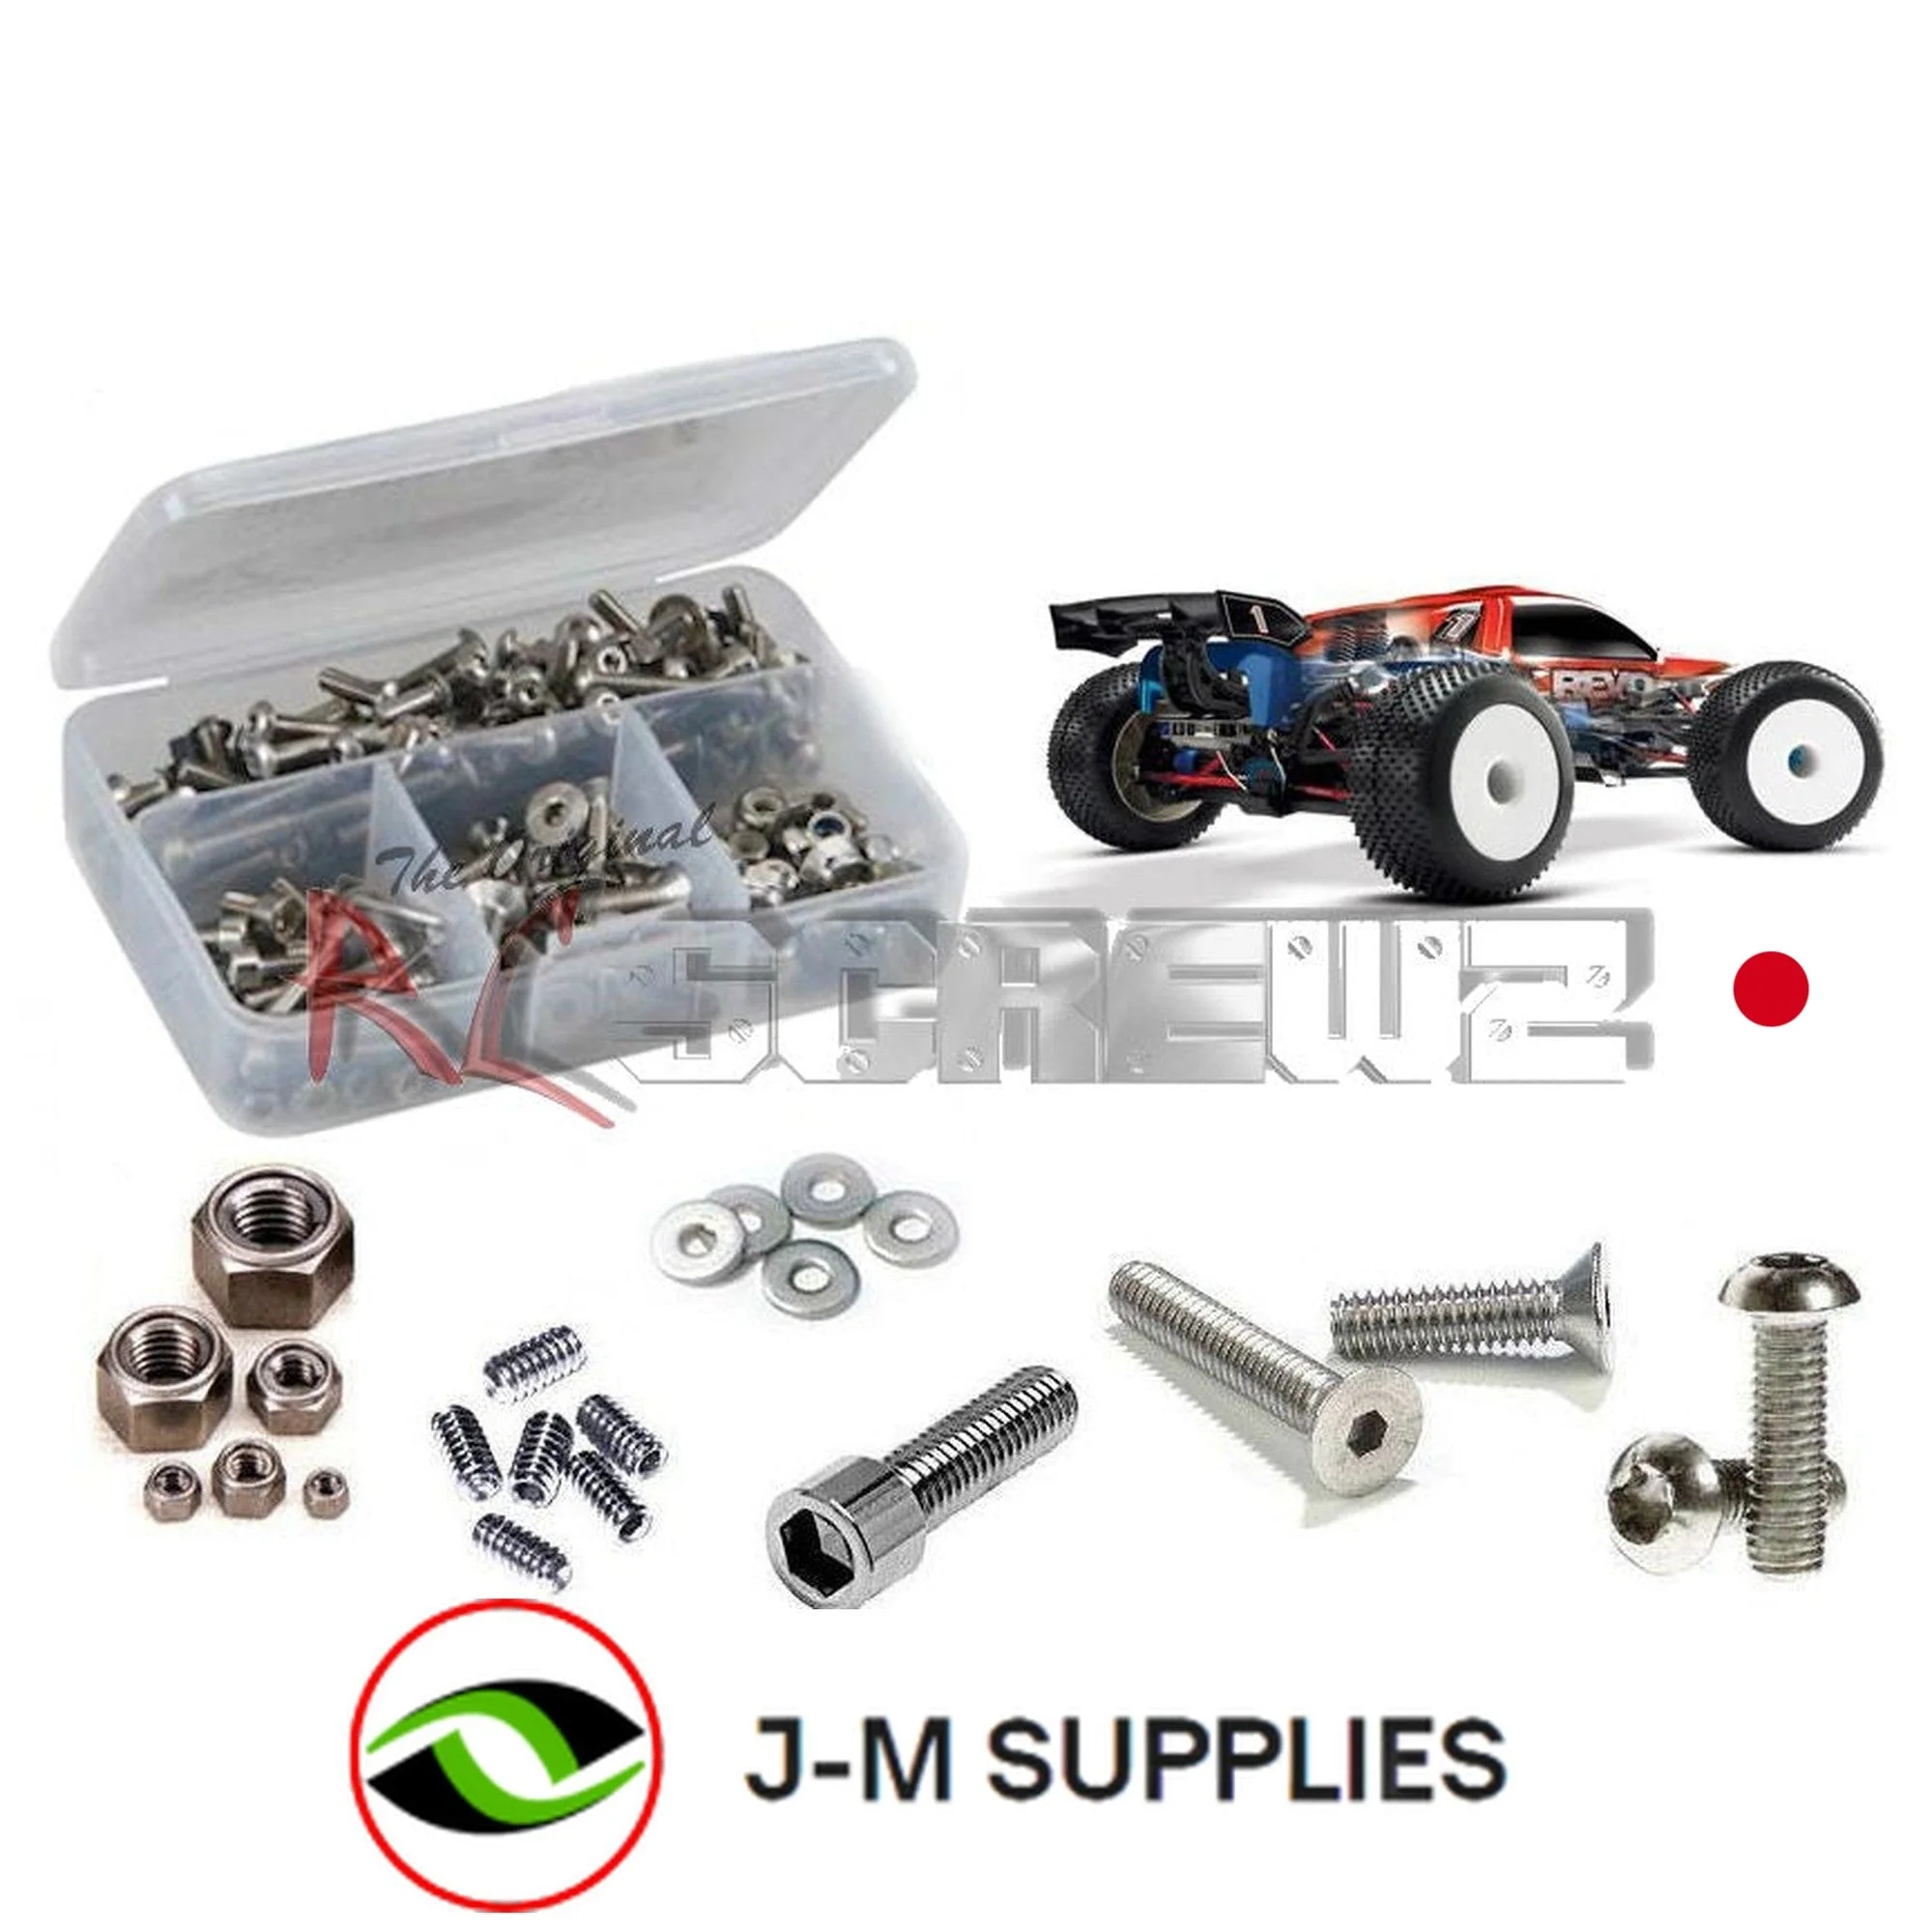 RCScrewZ Stainless Screw Kit tra031 for Traxxas Revo 3.3 Platinum Edition RC MT - Picture 1 of 12